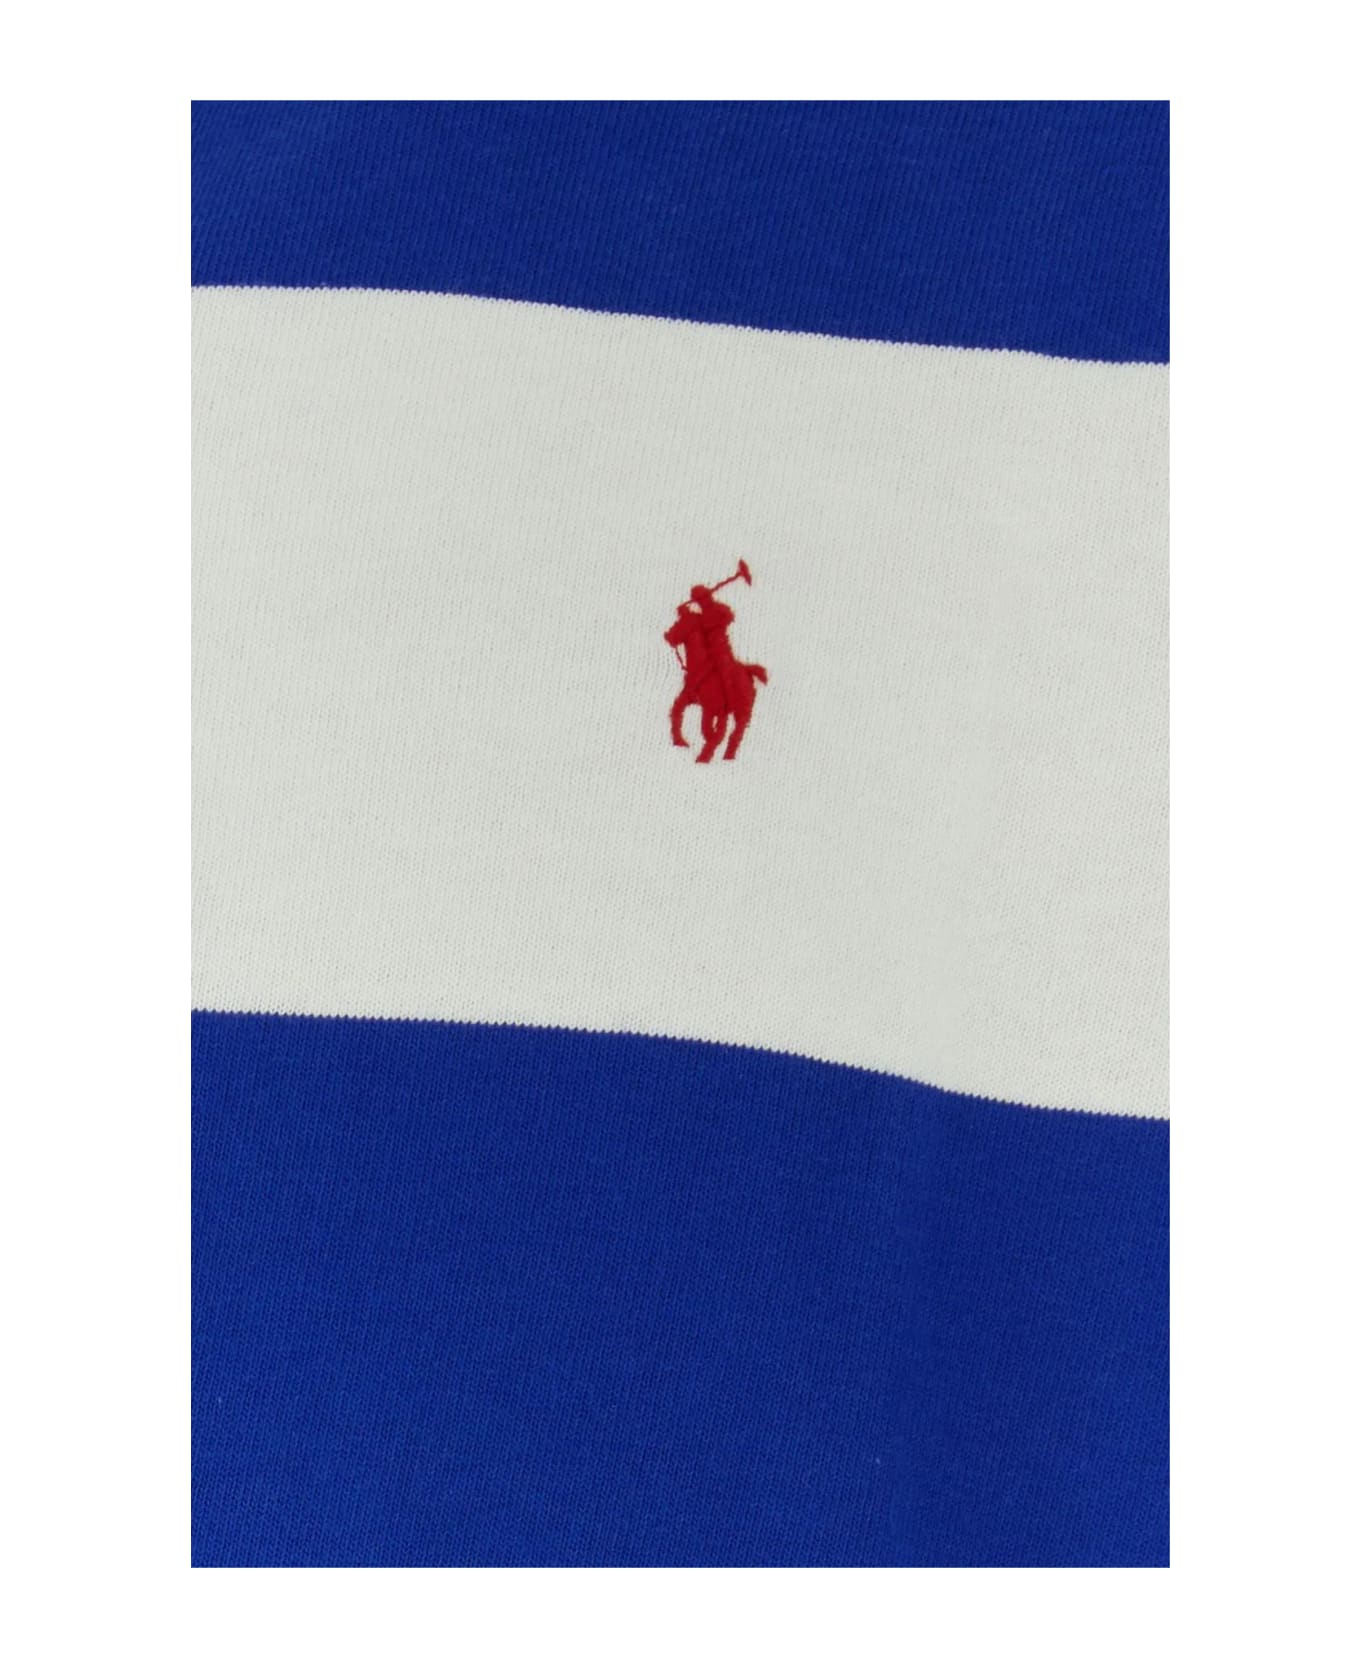 Ralph Lauren Embroidered Cotton Polo Shirt - Cruise Royal Oxford